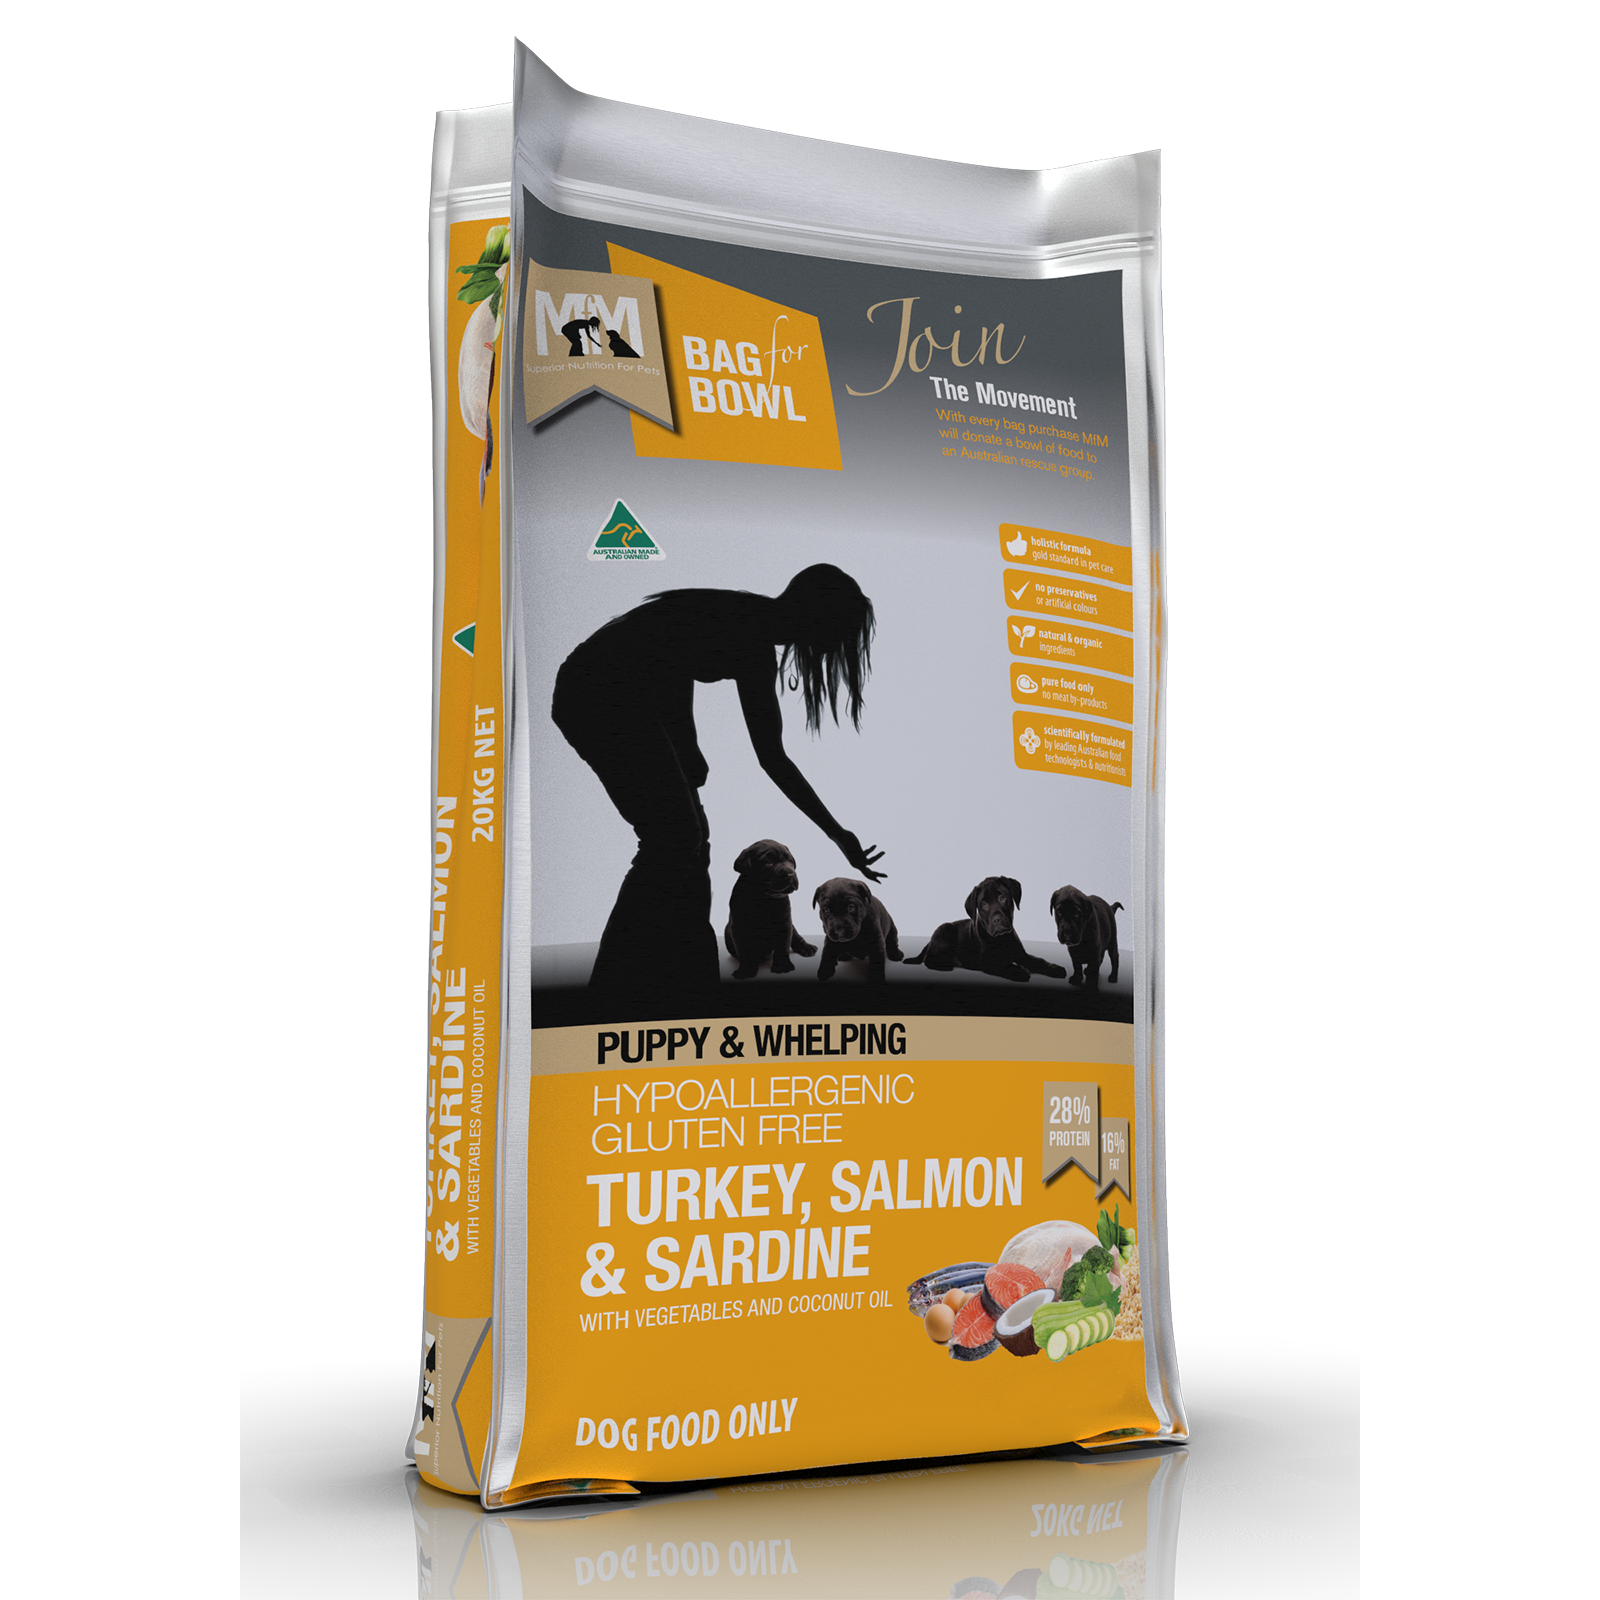 Meals For Mutts Dog Food Puppy Turkey & Salmon